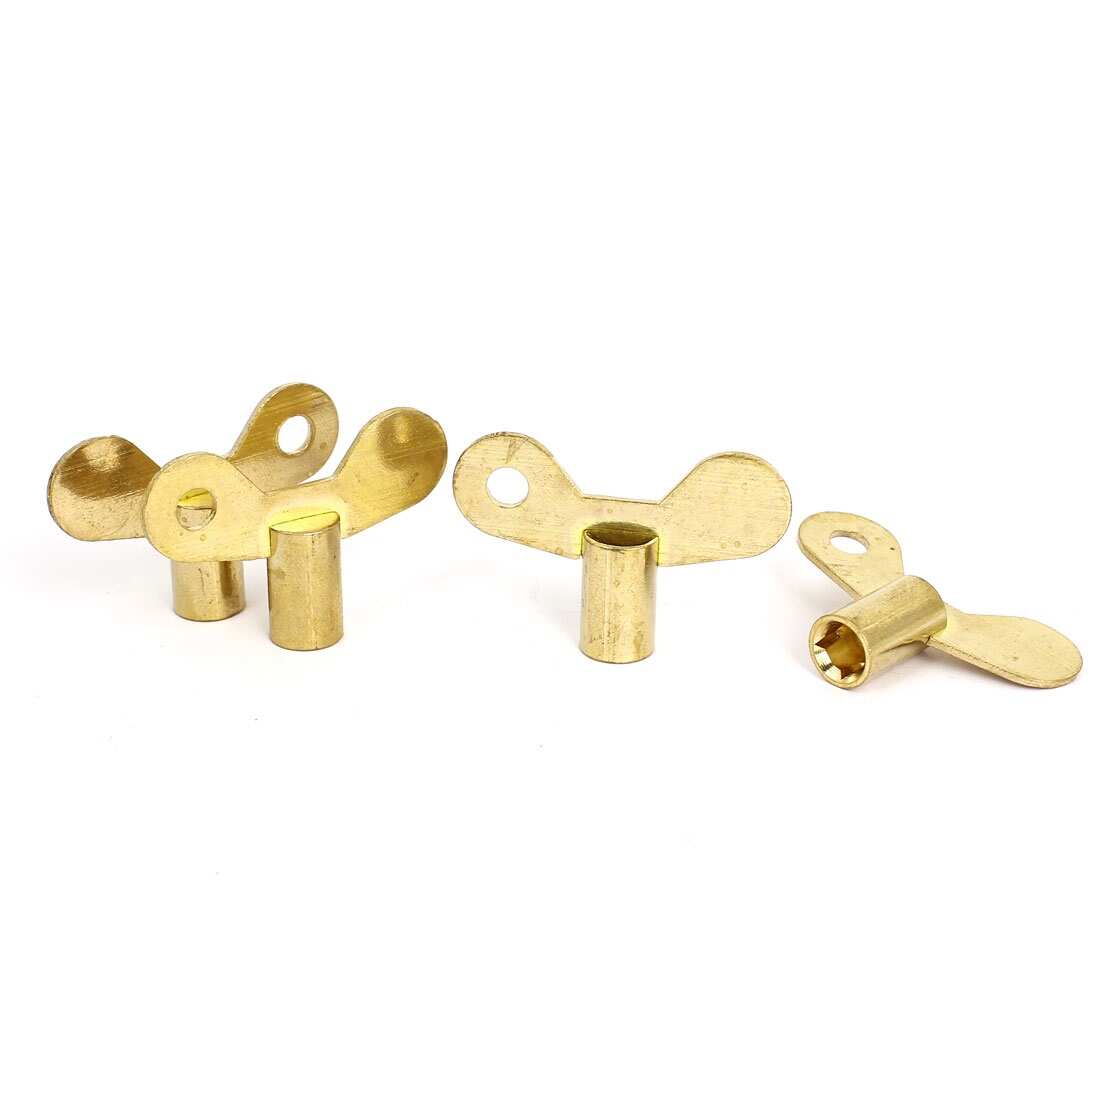 6mm x 6mm Square Bathroom Basin Sink Water Tap Faucet Key Switch 4 Pcs - Gold Tone